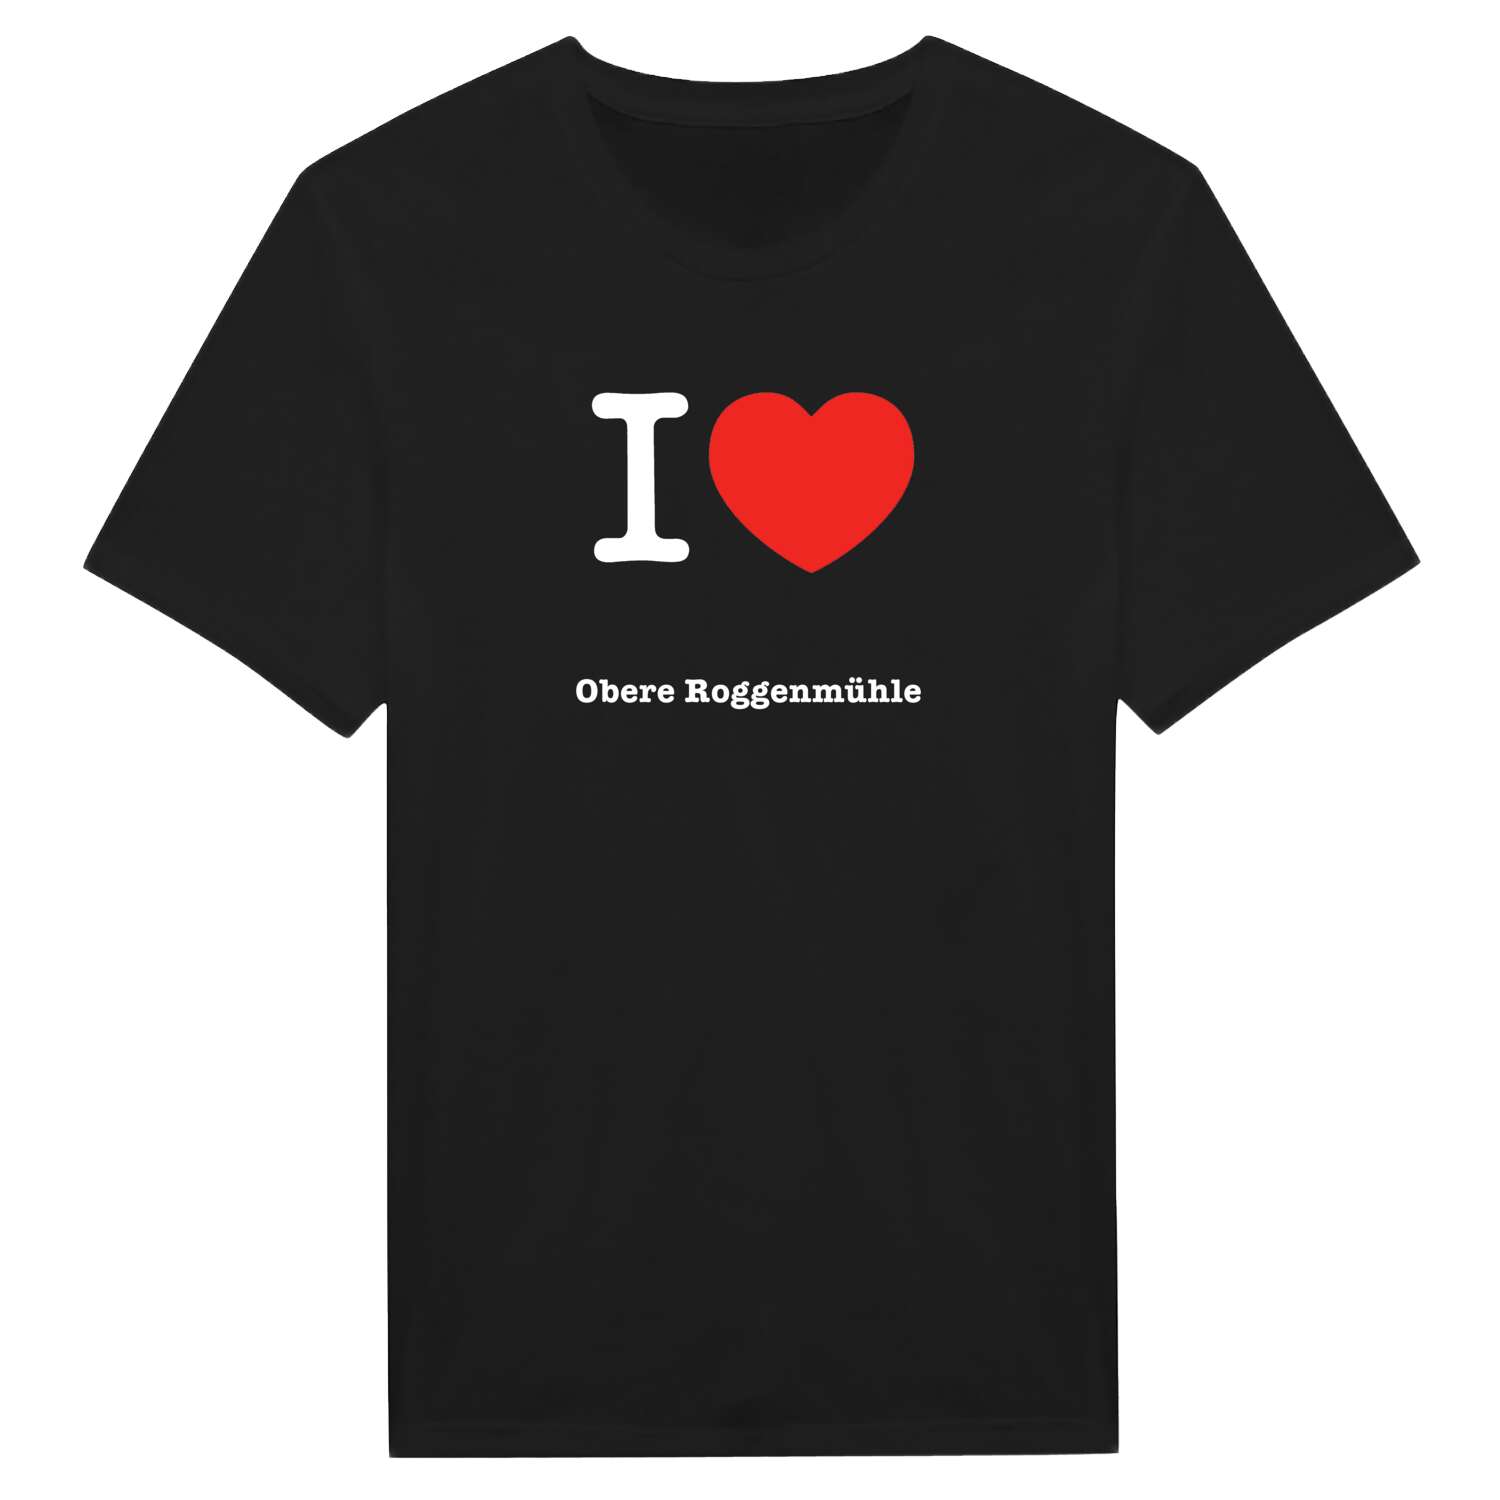 Obere Roggenmühle T-Shirt »I love«